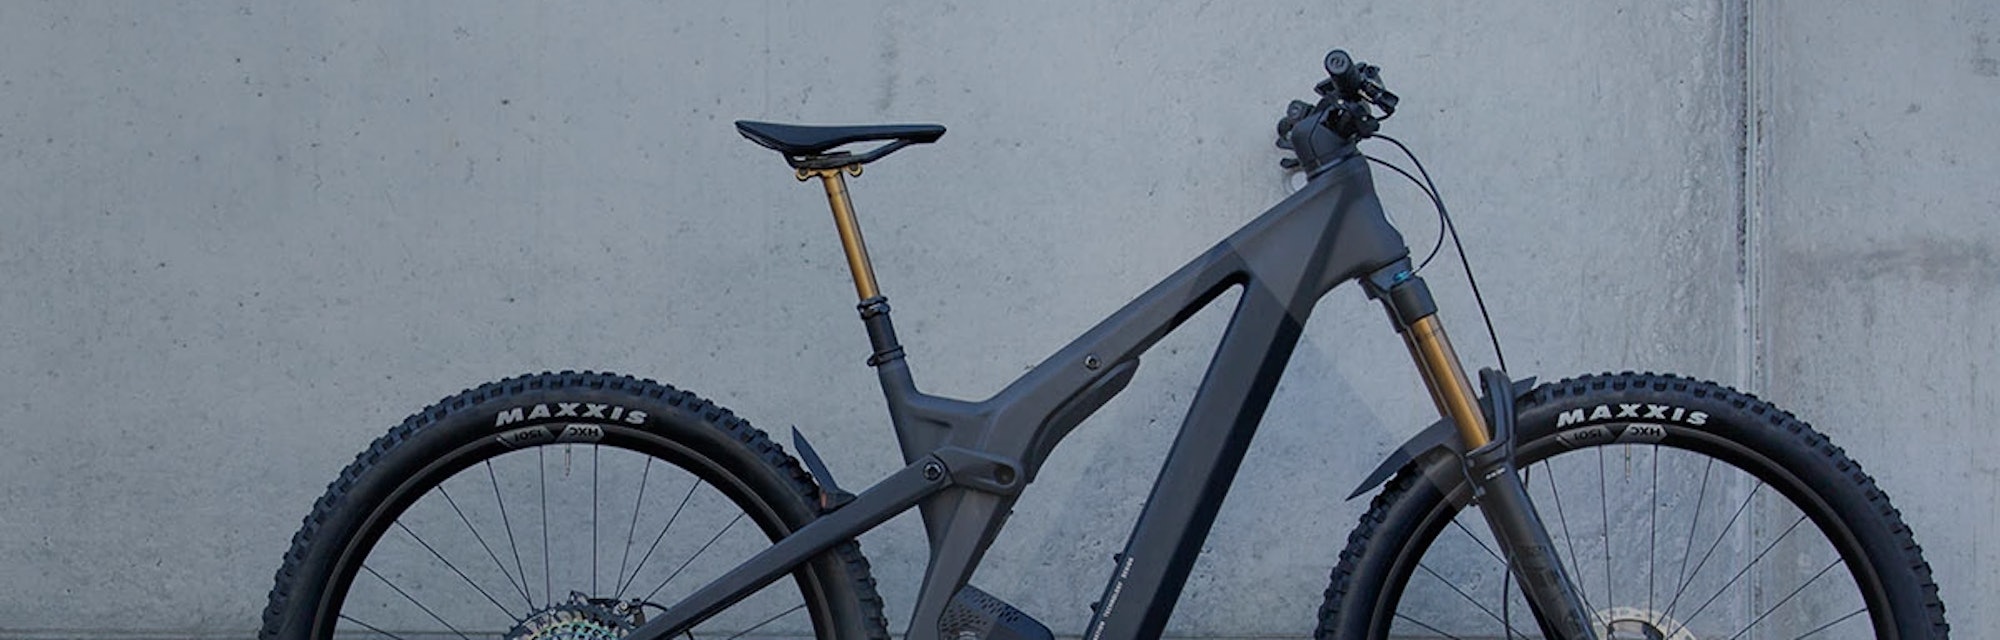 Scott Sports has unveiled a new ebike that neatly integrates components in the frame.